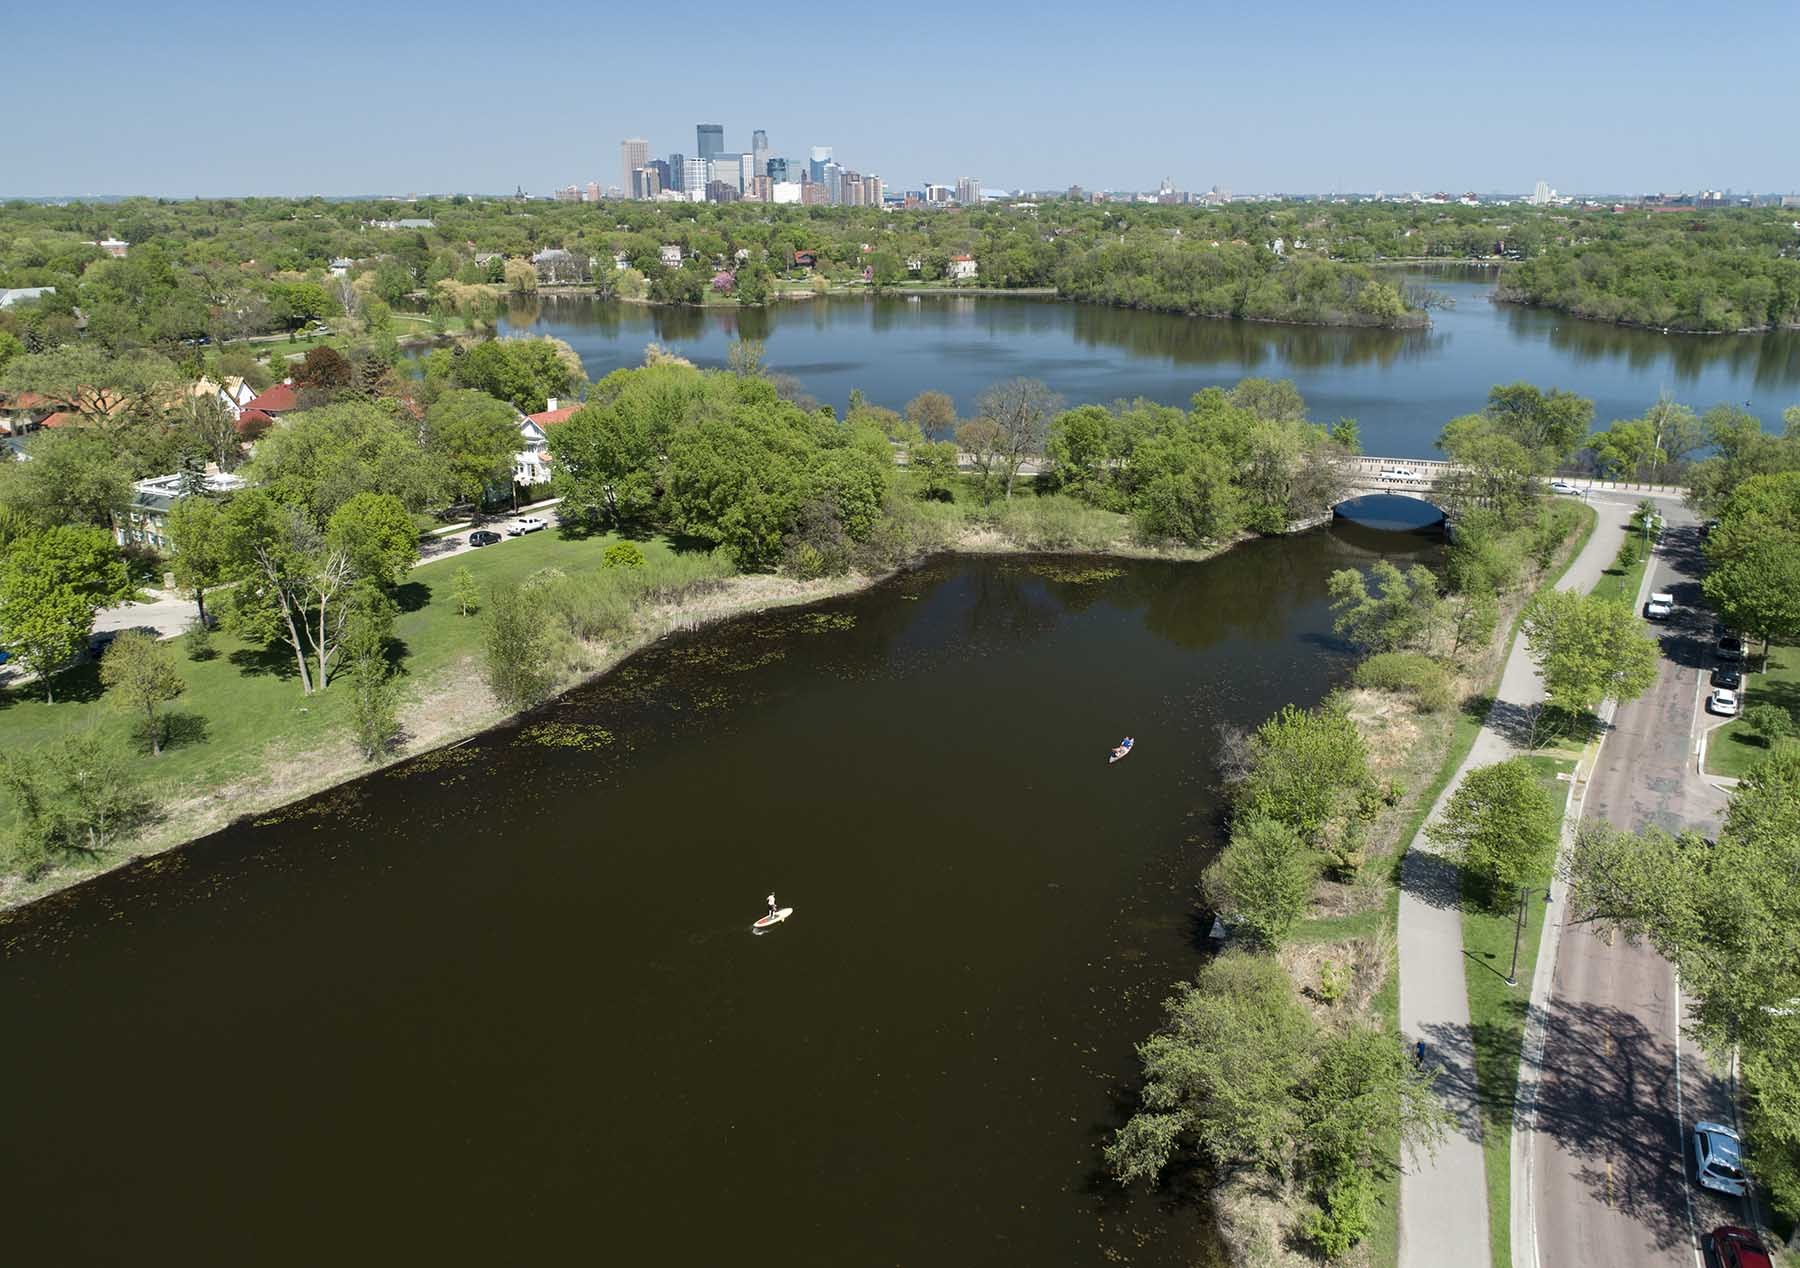 View of the Minneapolis skyline from Bde Maka Ska, a small lake Southwest of Minneapolis.